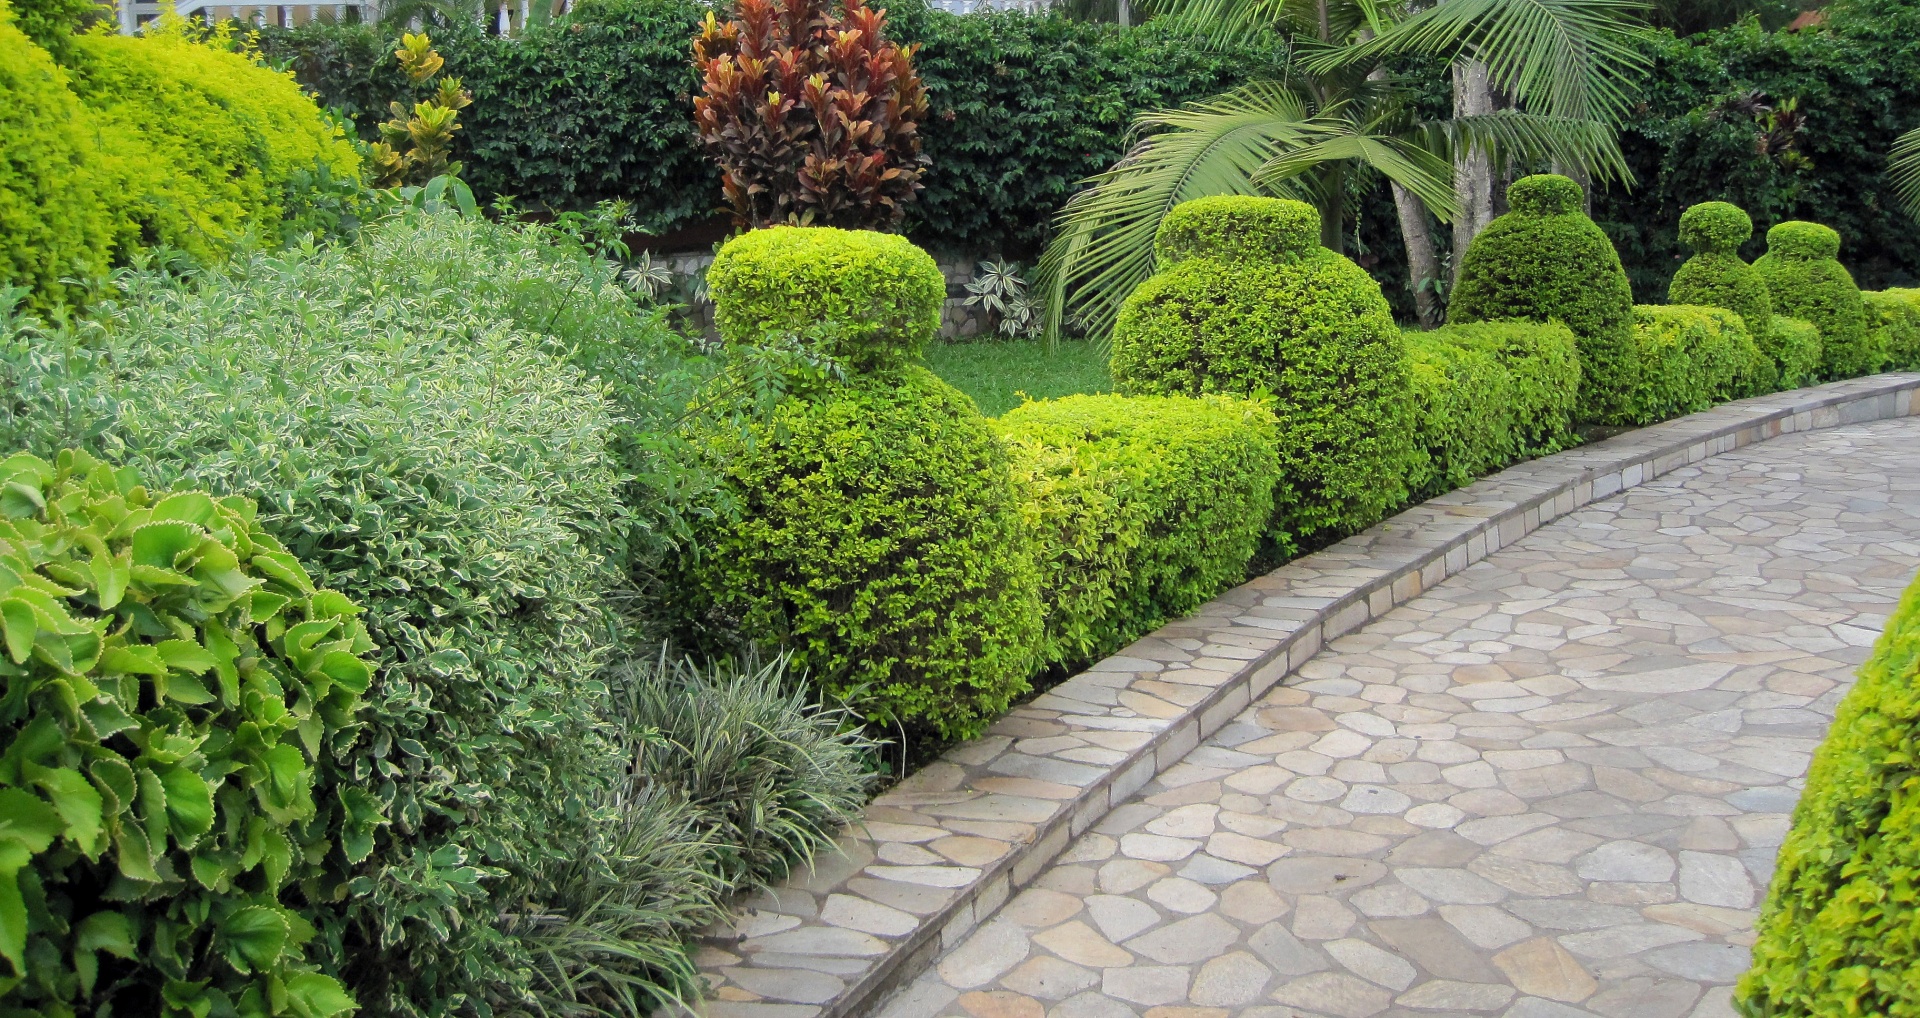 A garden with many shrubs, trees, and gardening tips.